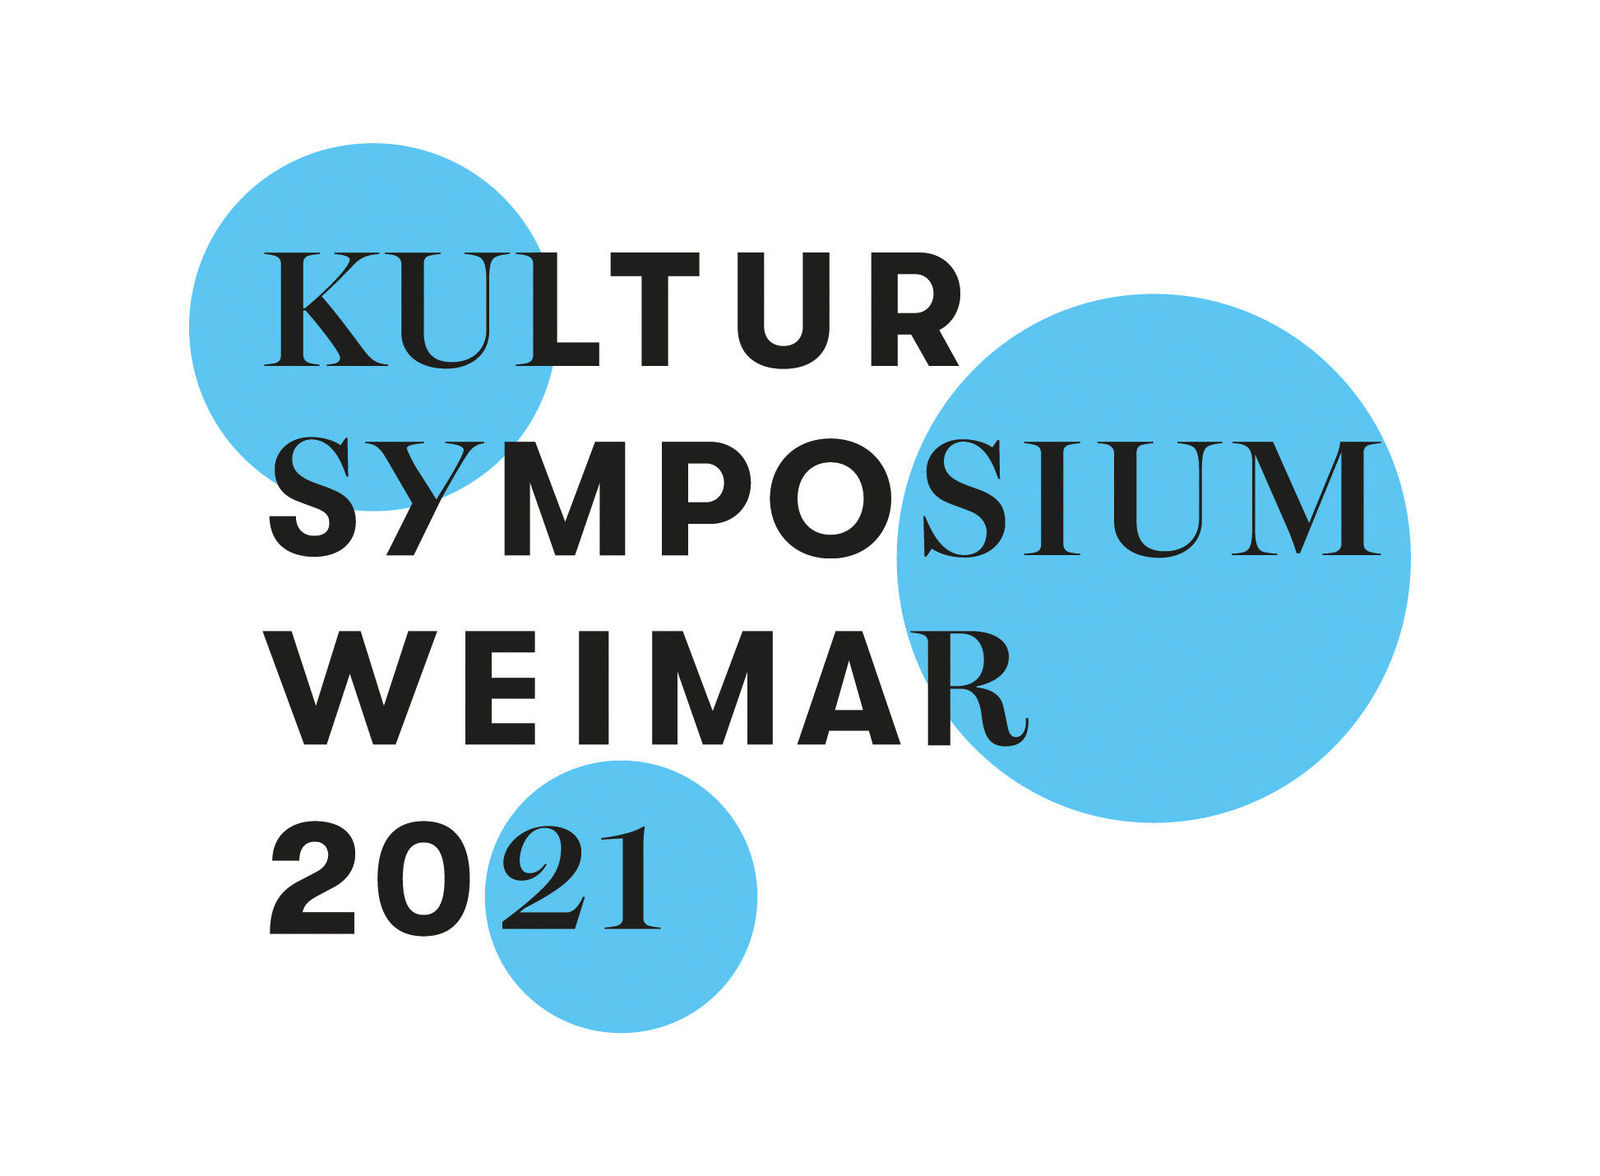 Volkswagen actively involved in generational discussions at Kultursymposium Weimar hosted by Goethe-Institut